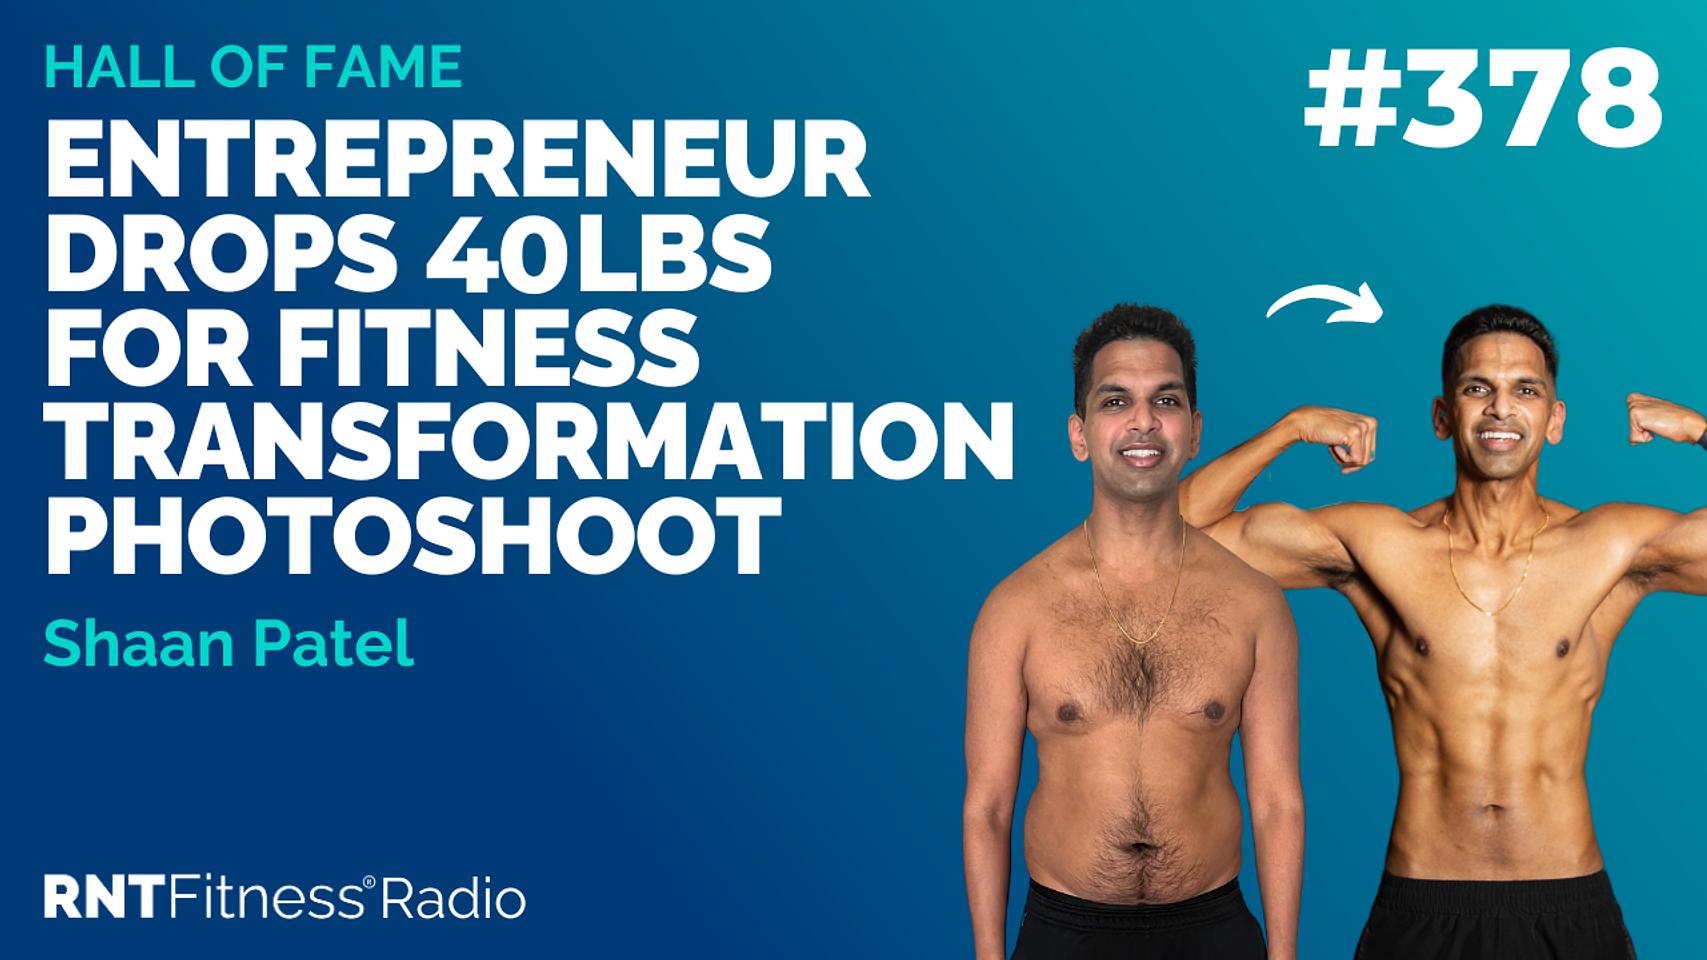 Ep 378 - Hall Of Fame | Shaan Patel: Entrepreneur Drops 40lbs For Fitness Transformation Photoshoot